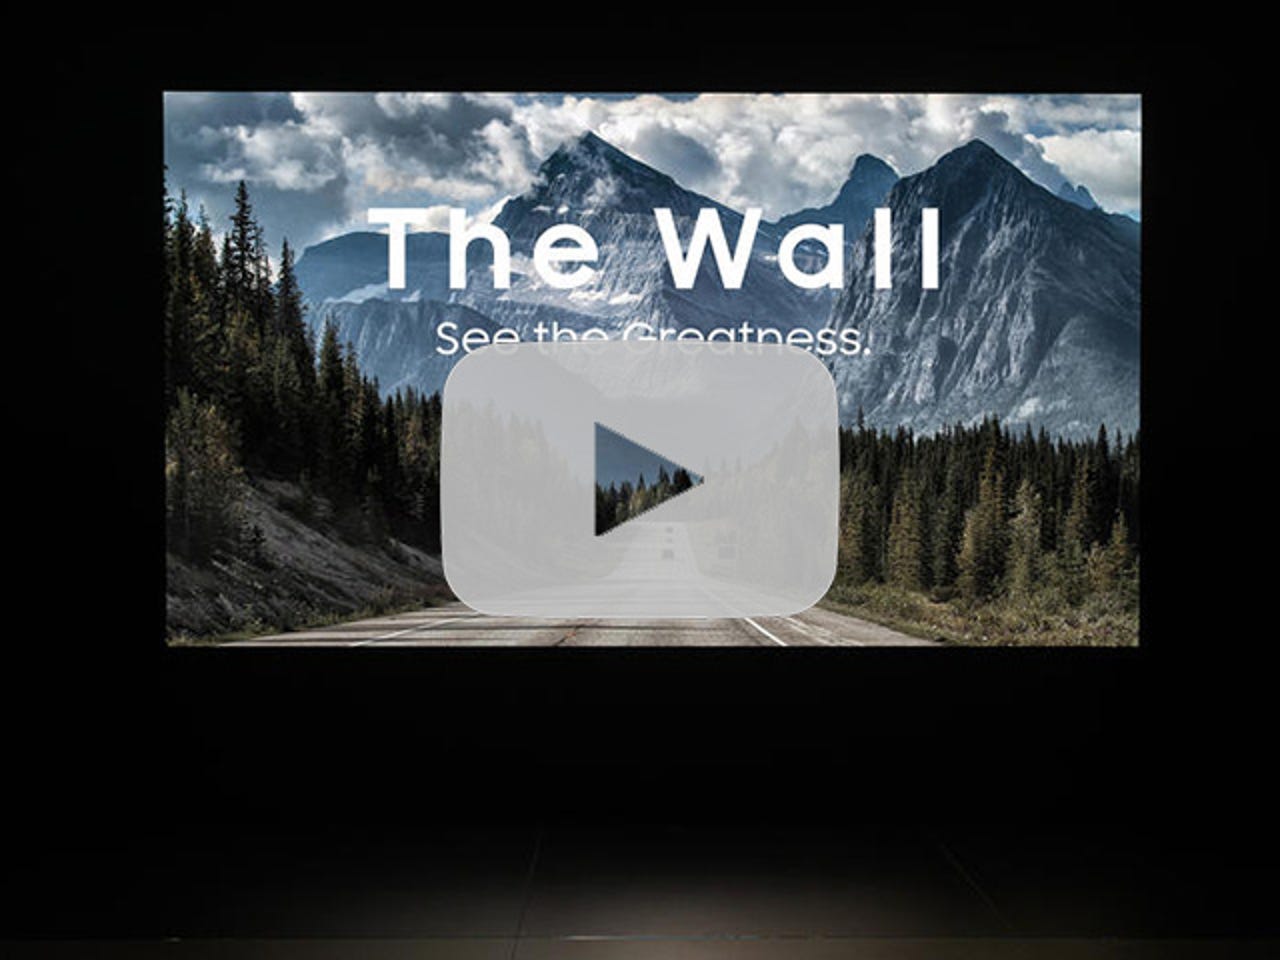 Samsung opens pre-orders for 'The Wall' MicroLED TV